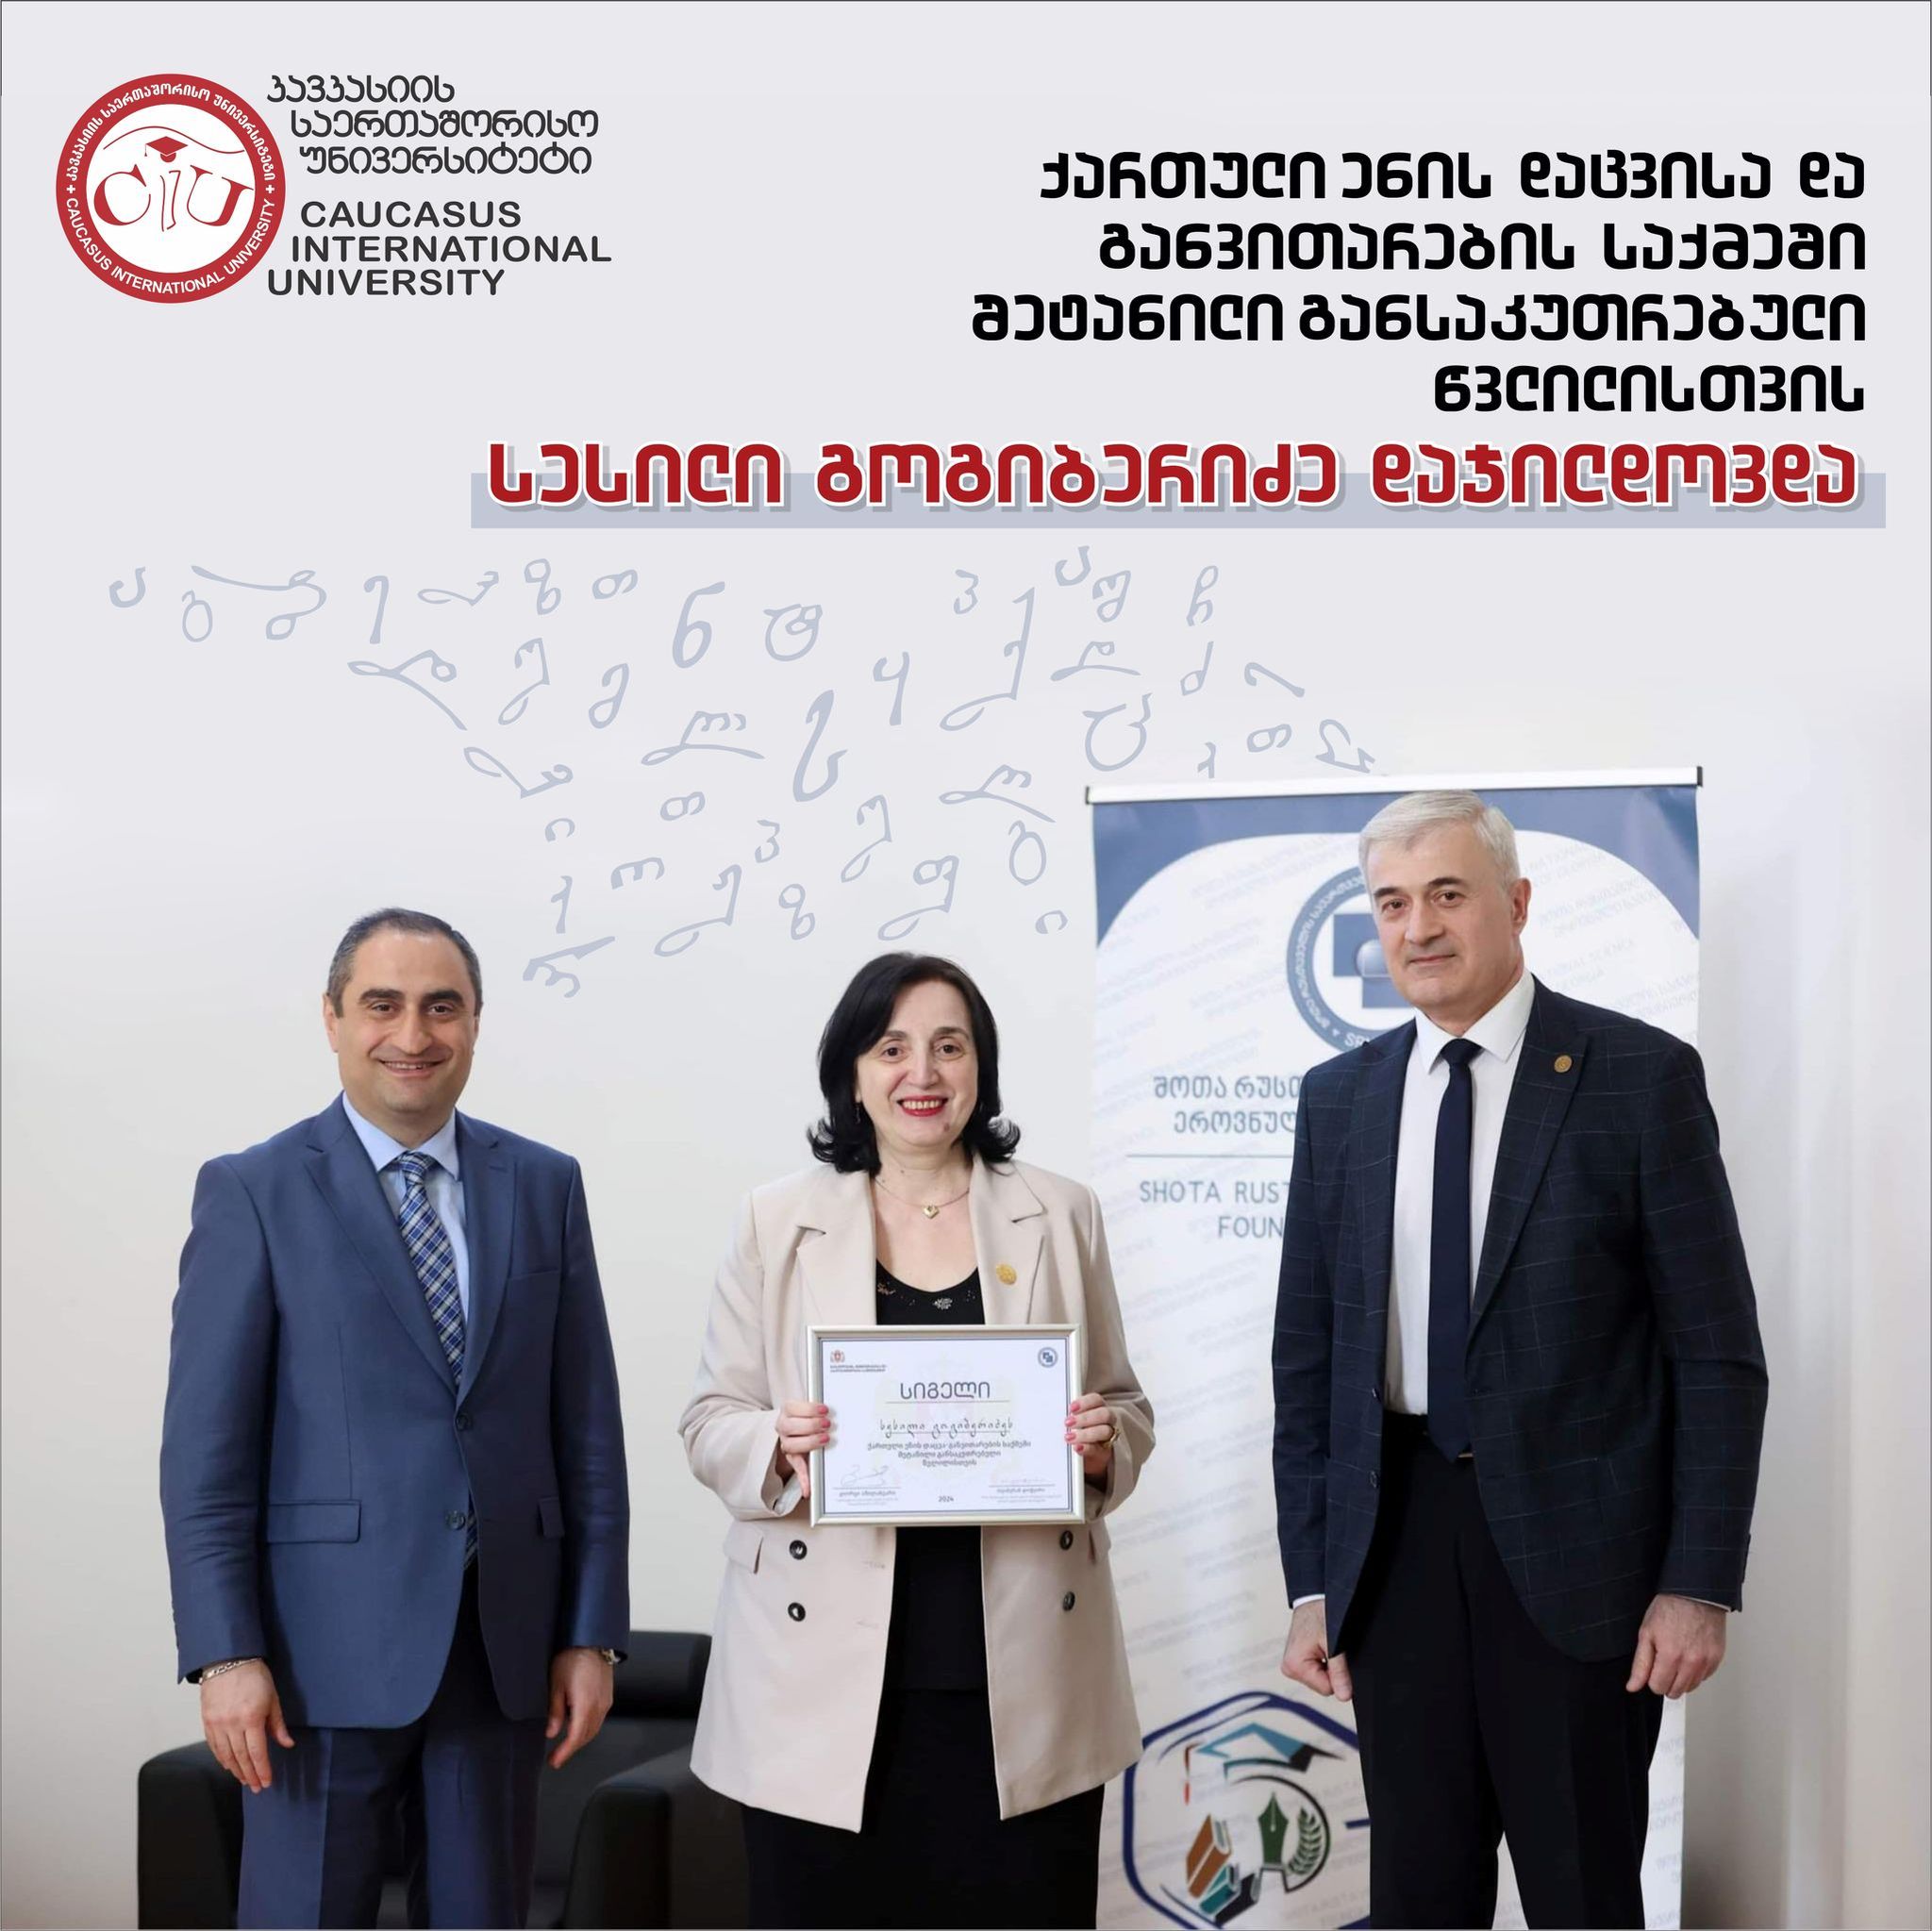 Sesili Gogiberidze, Doctor of Philology, was Awarded for Her Special Contribution to Preservation and Development of Georgian language